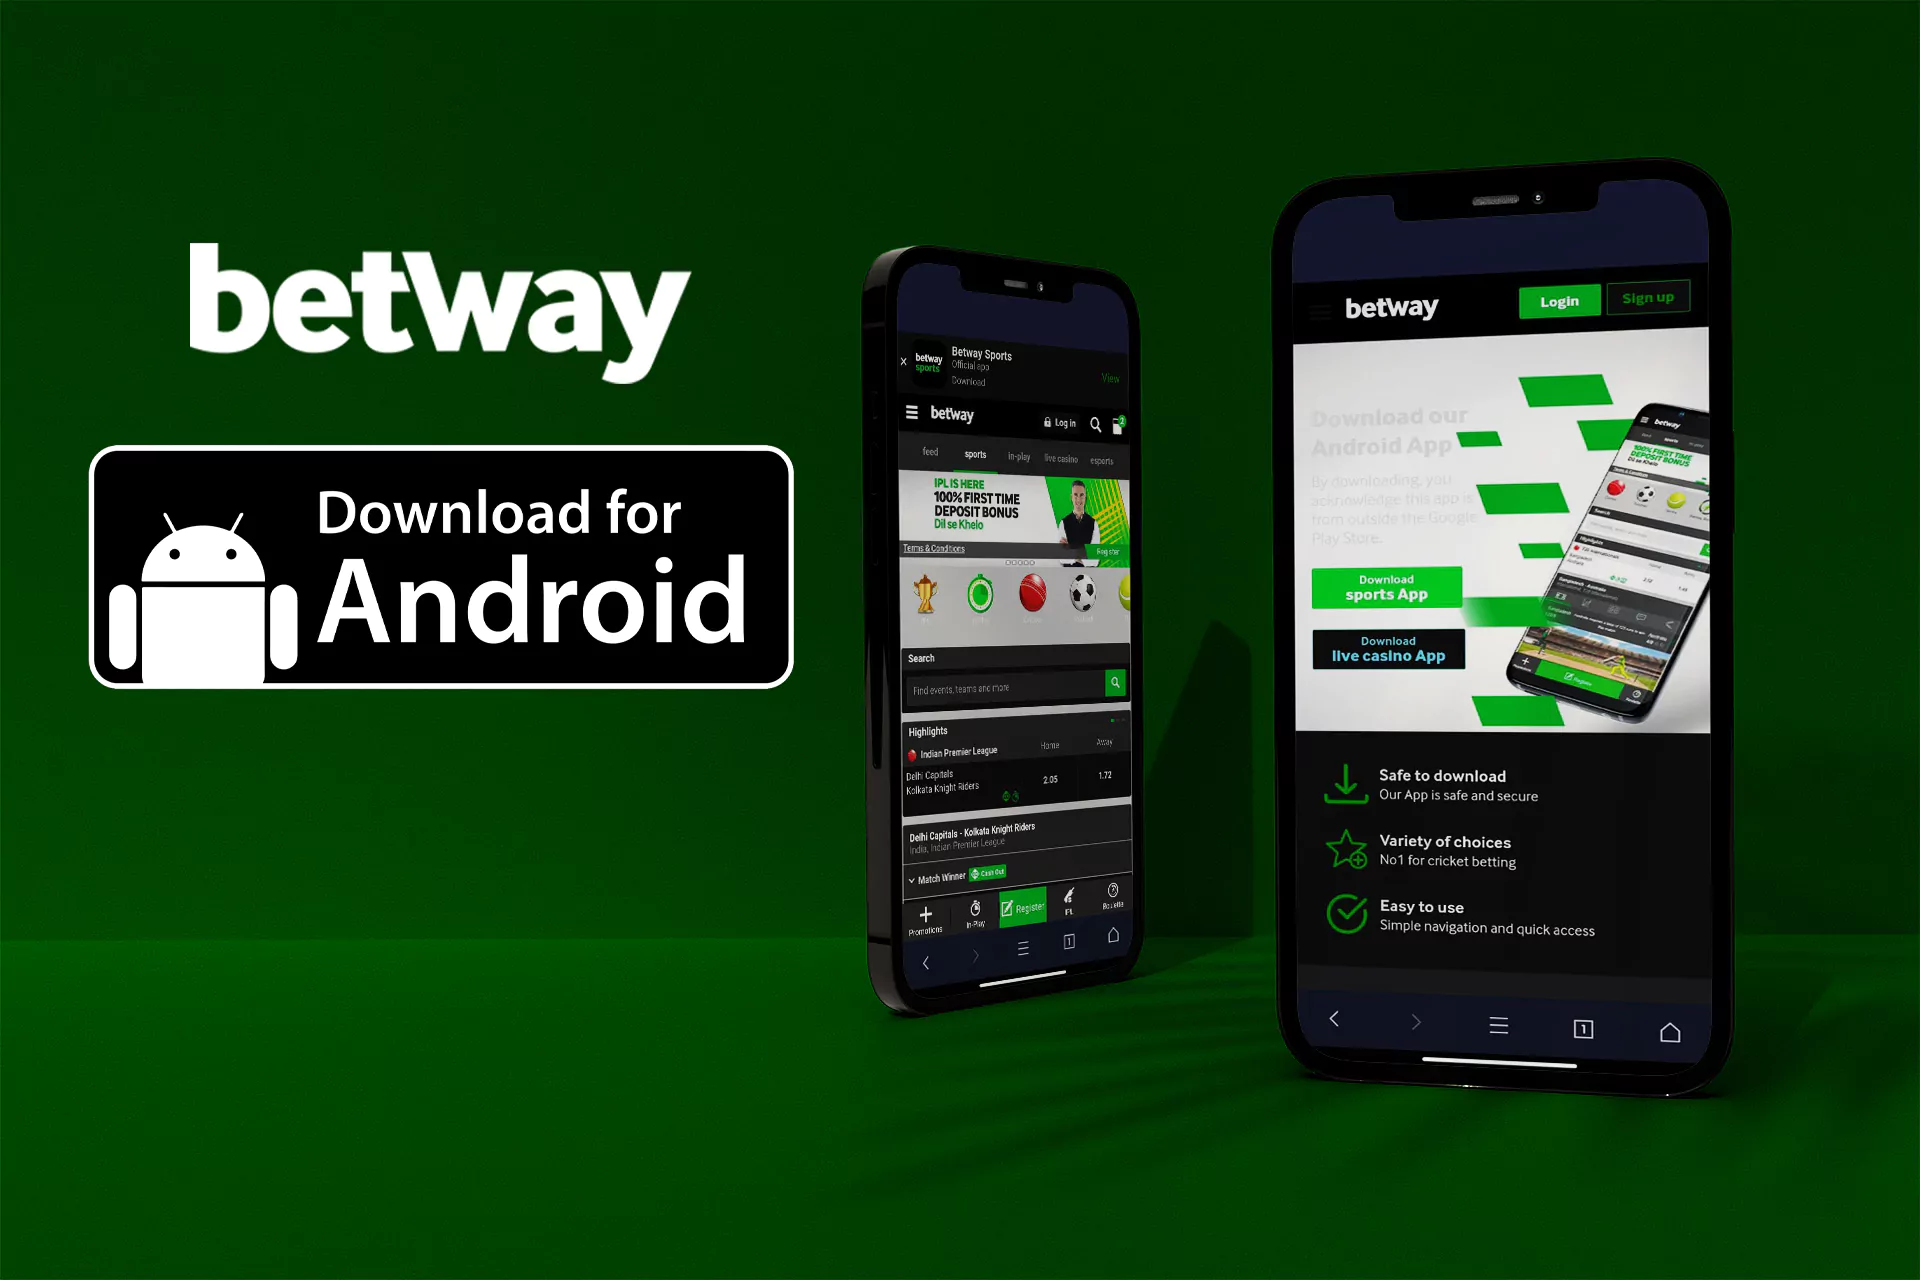 Betway has a special apk file for android phones. Download it to your device and enjoy the privileges of the bookmaker.